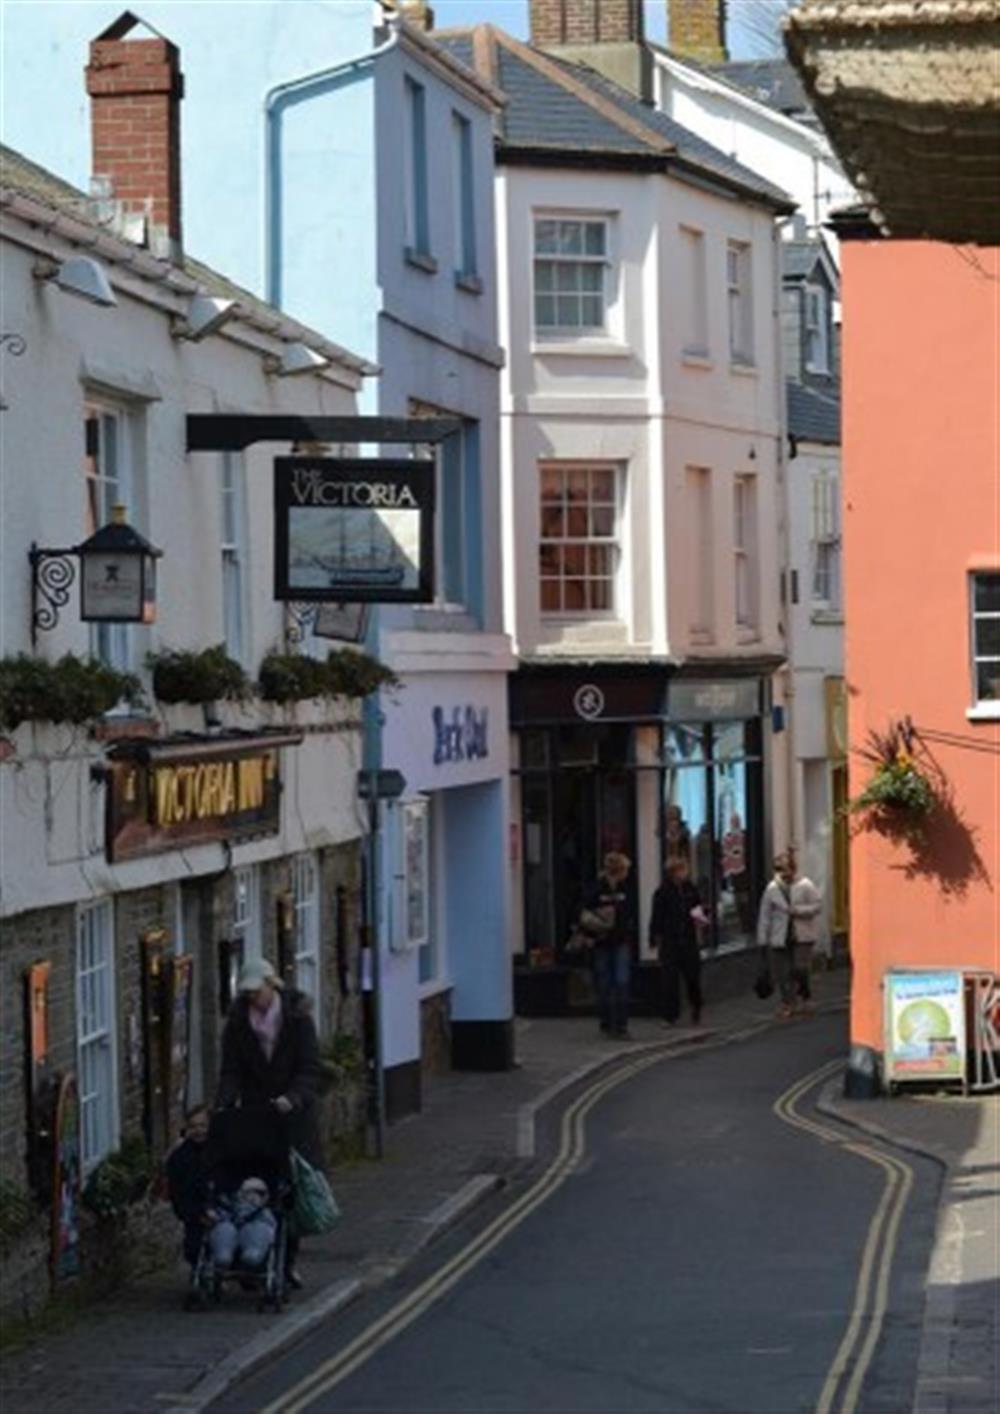 Great pubs, shops and restaurants nearby at 1 Kings Cottages in Salcombe